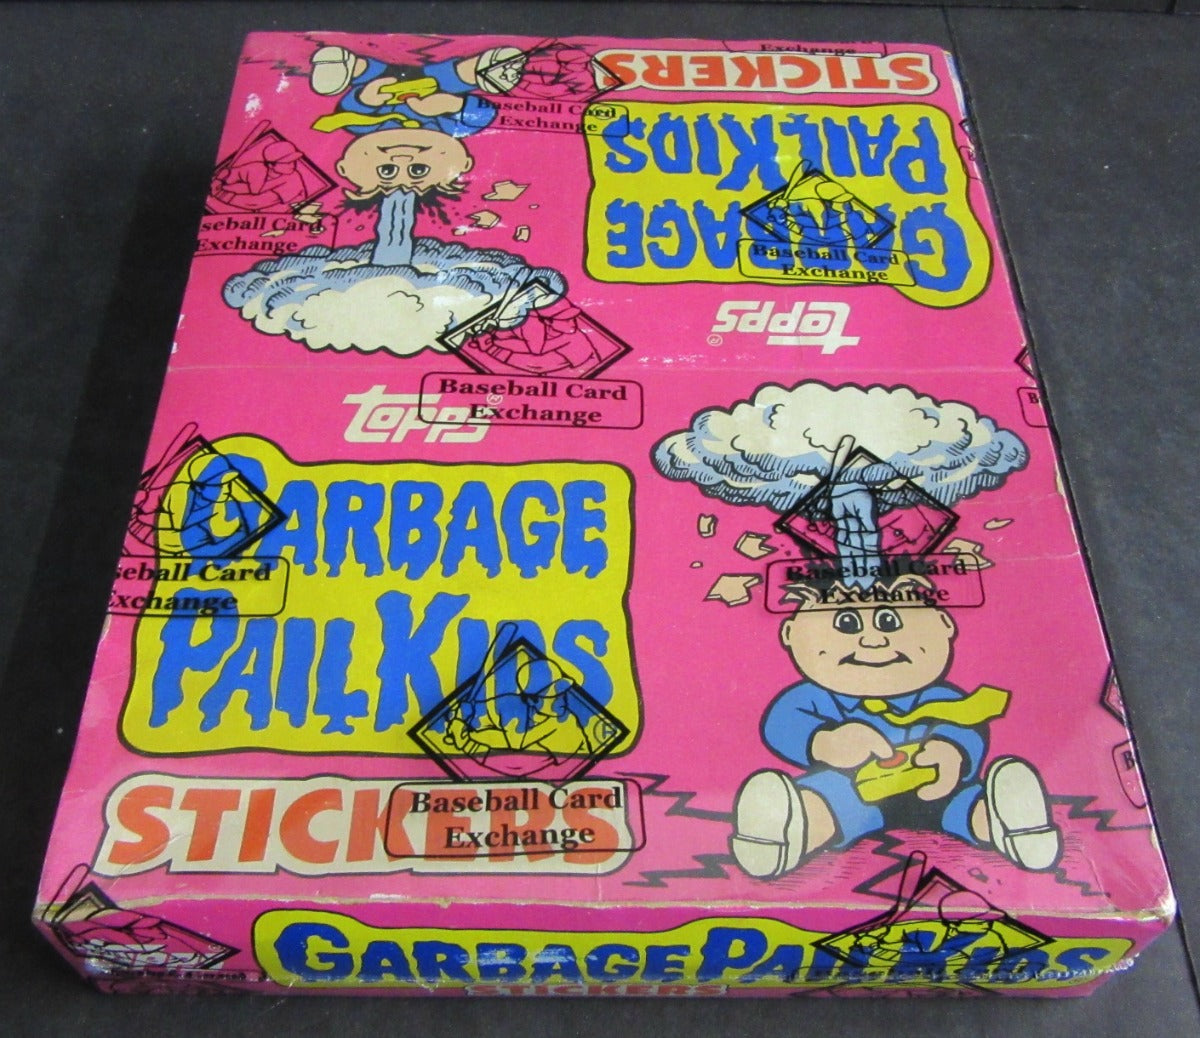 1986 Topps Garbage Pail Kids Series 3 / 4 Unopened Rack Box (Authenticate)